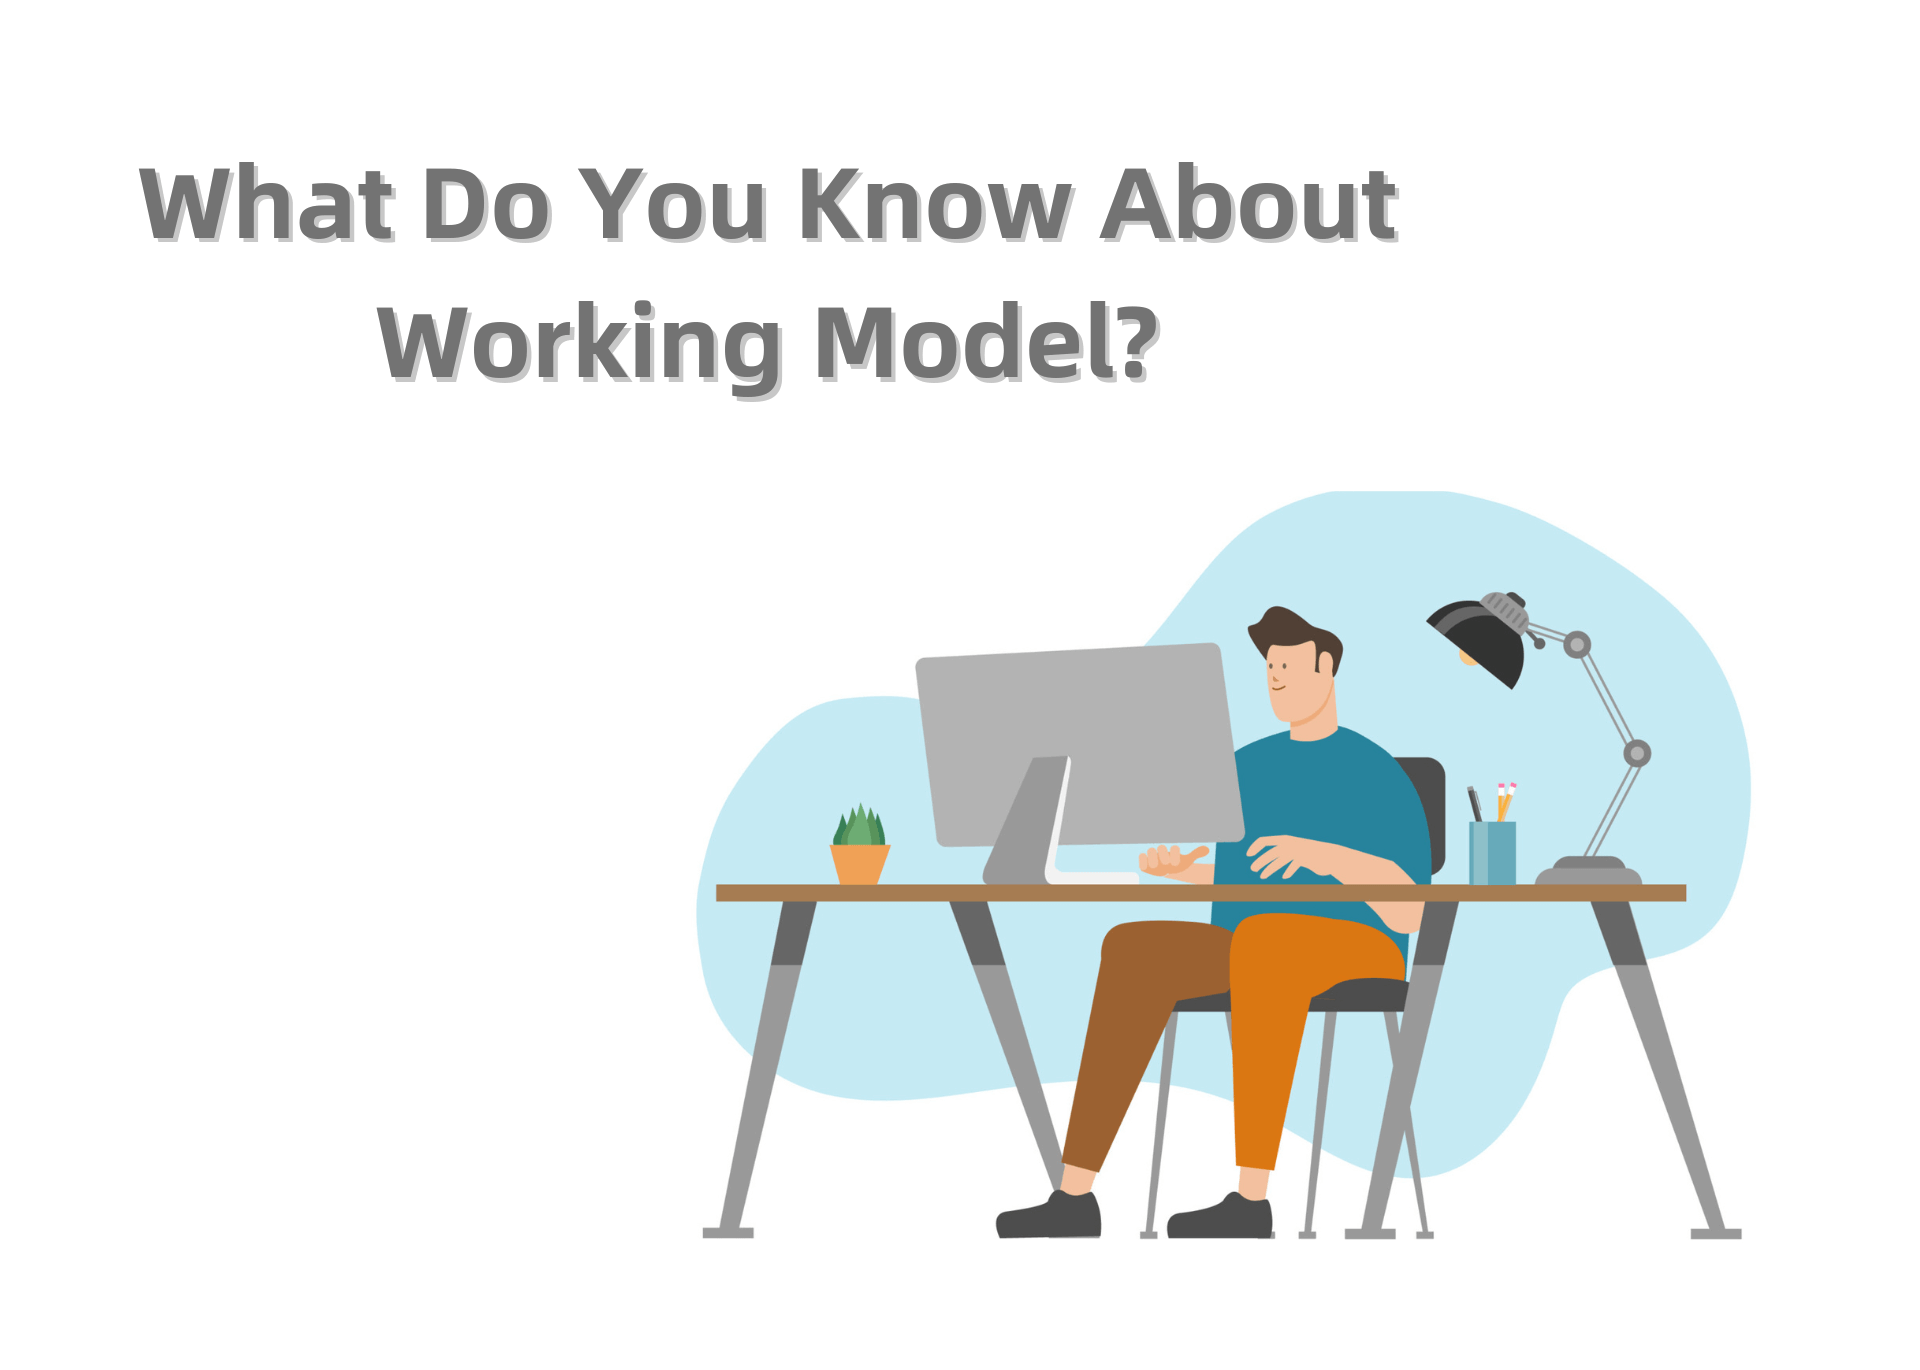 What are major models of work